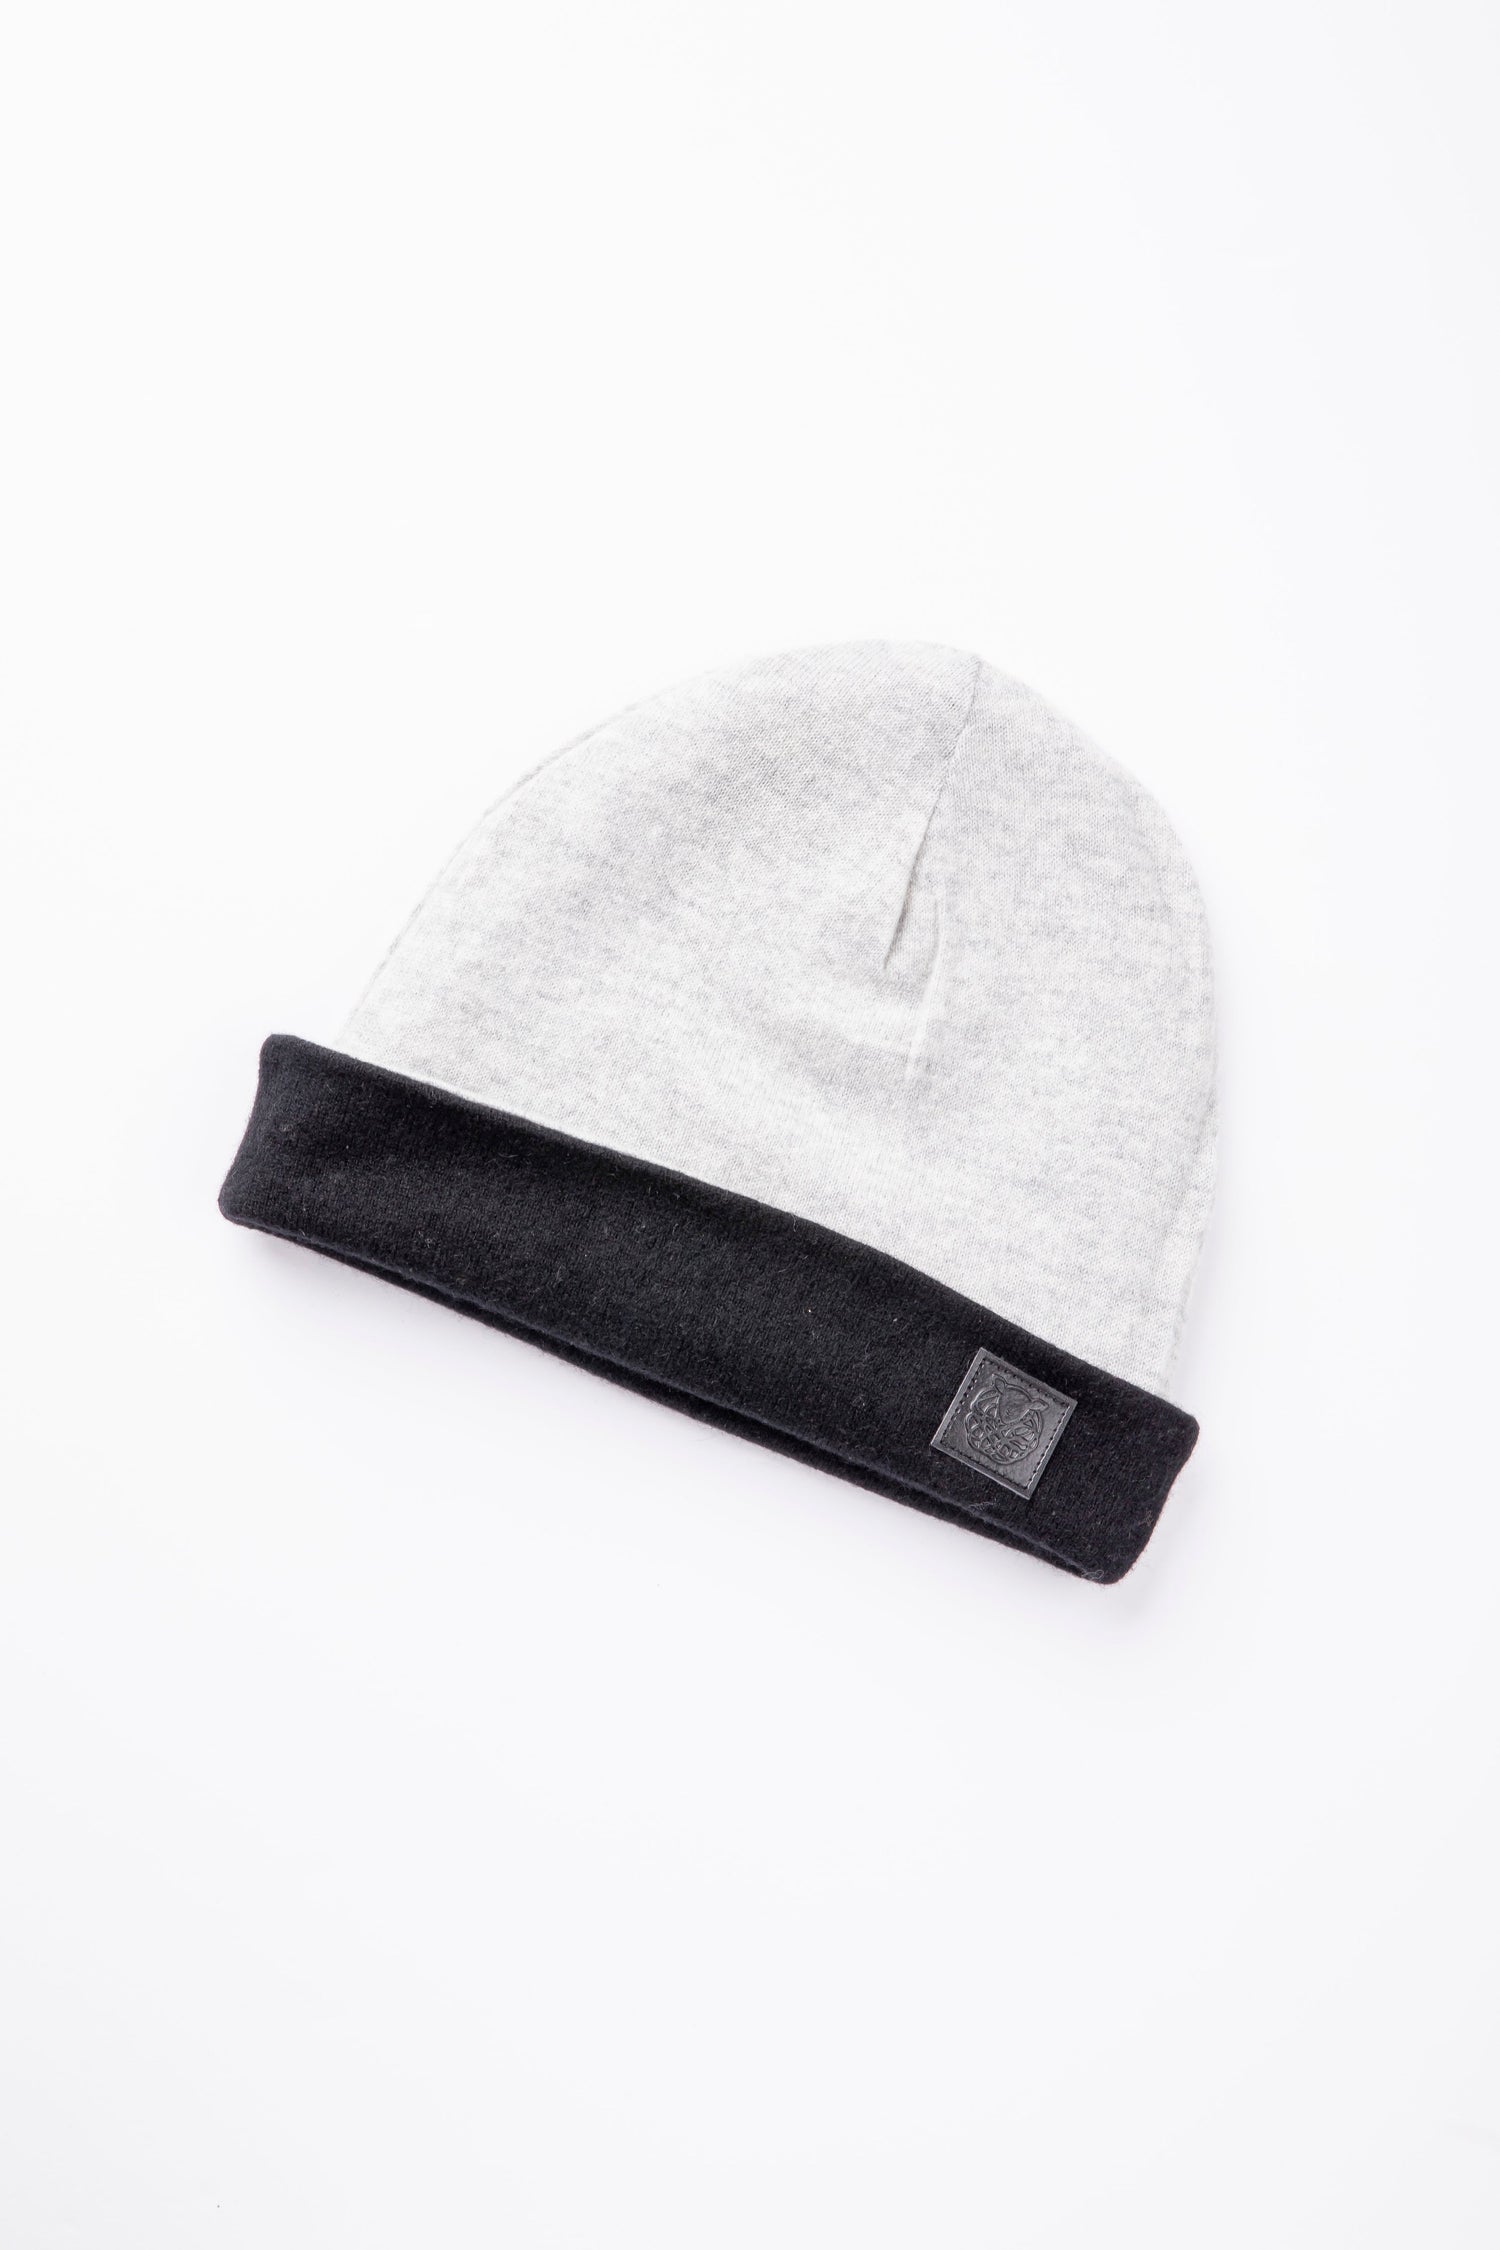 Black and Light Gray - Reversible Cashmere Beanie